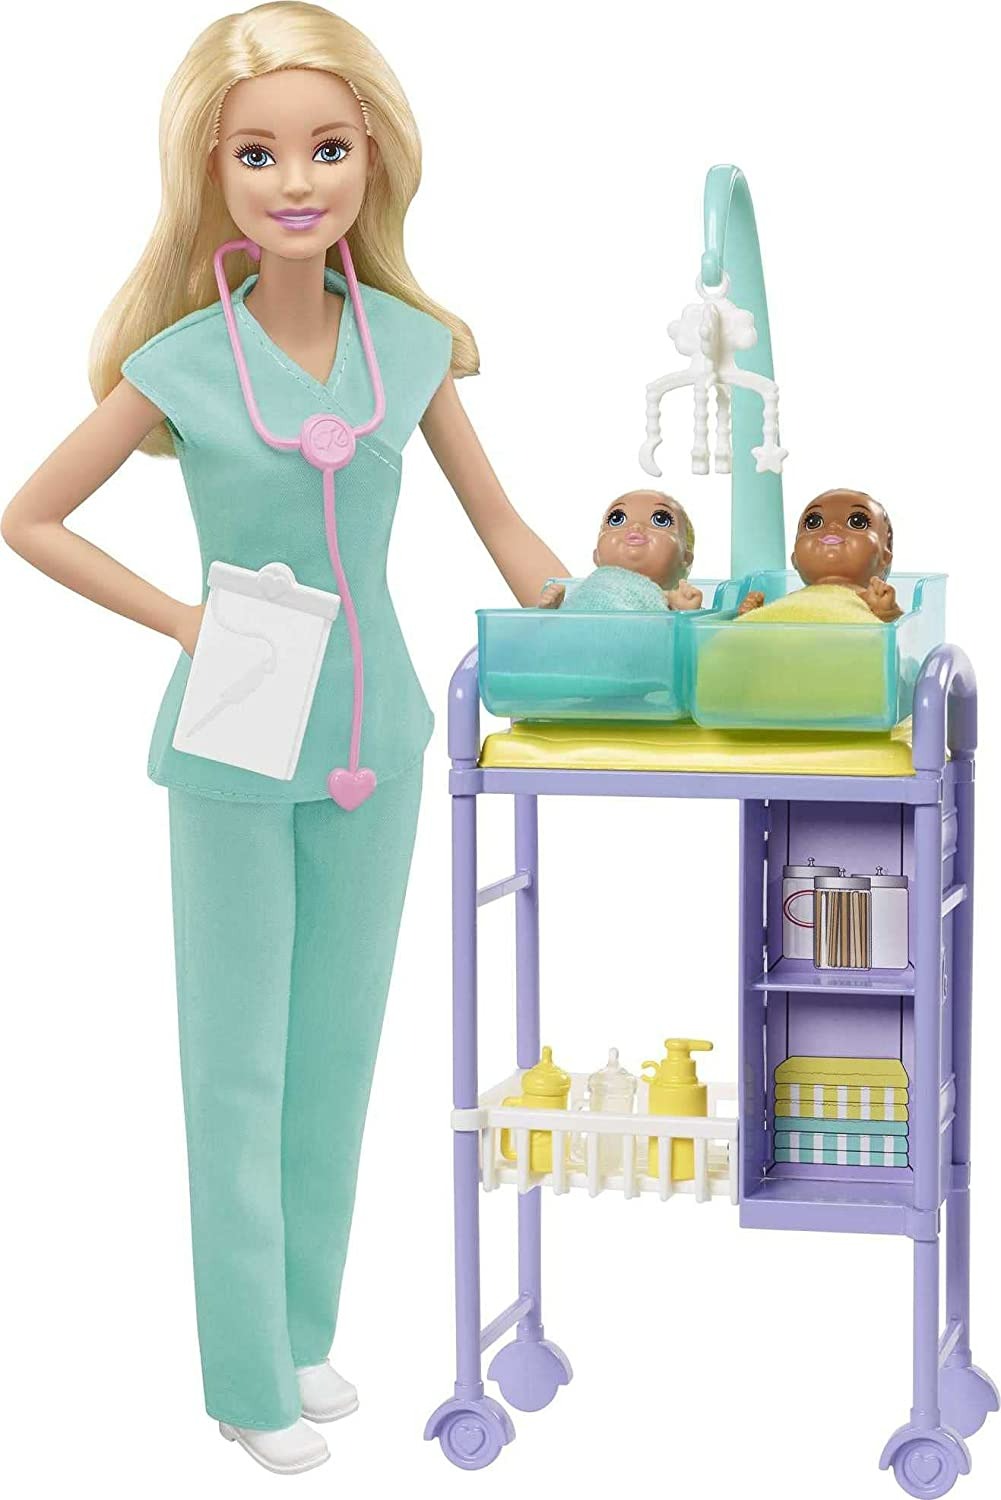 Barbie Careers Doll & Playset - Baby Doctor Theme with Blonde Fashion Doll